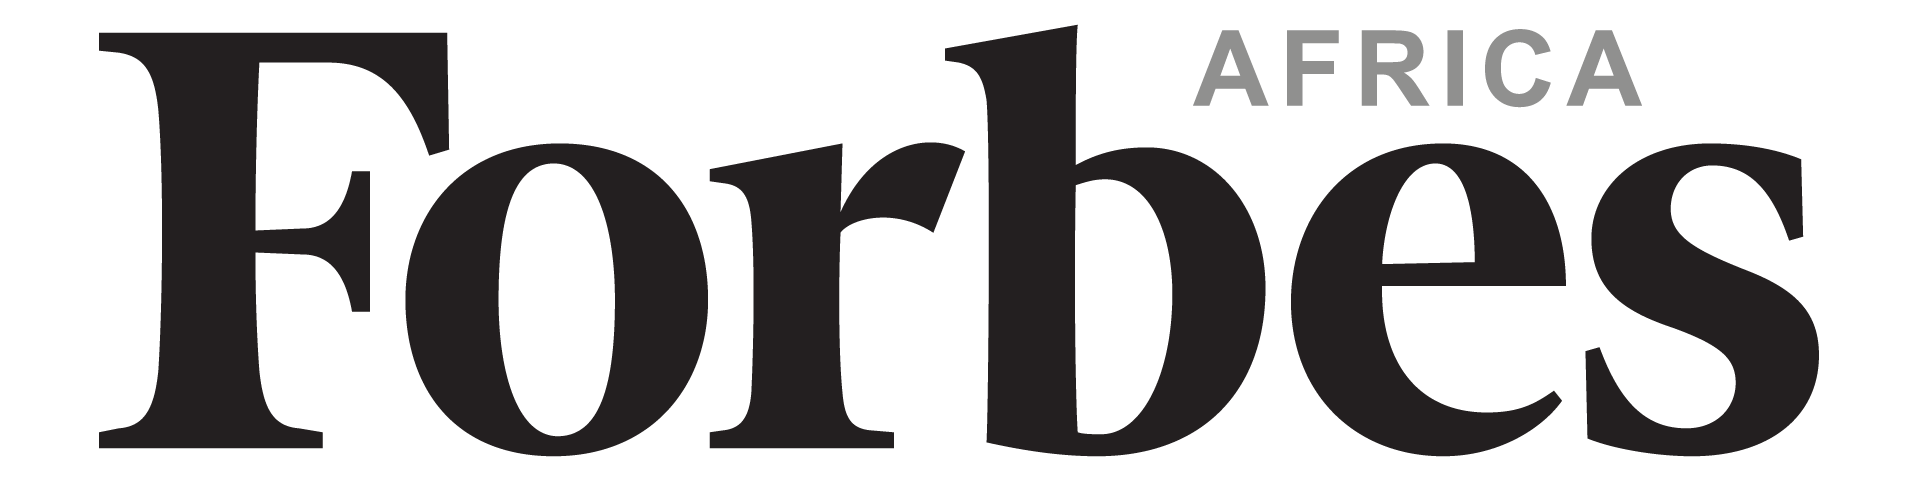 Forbes Africa  logo